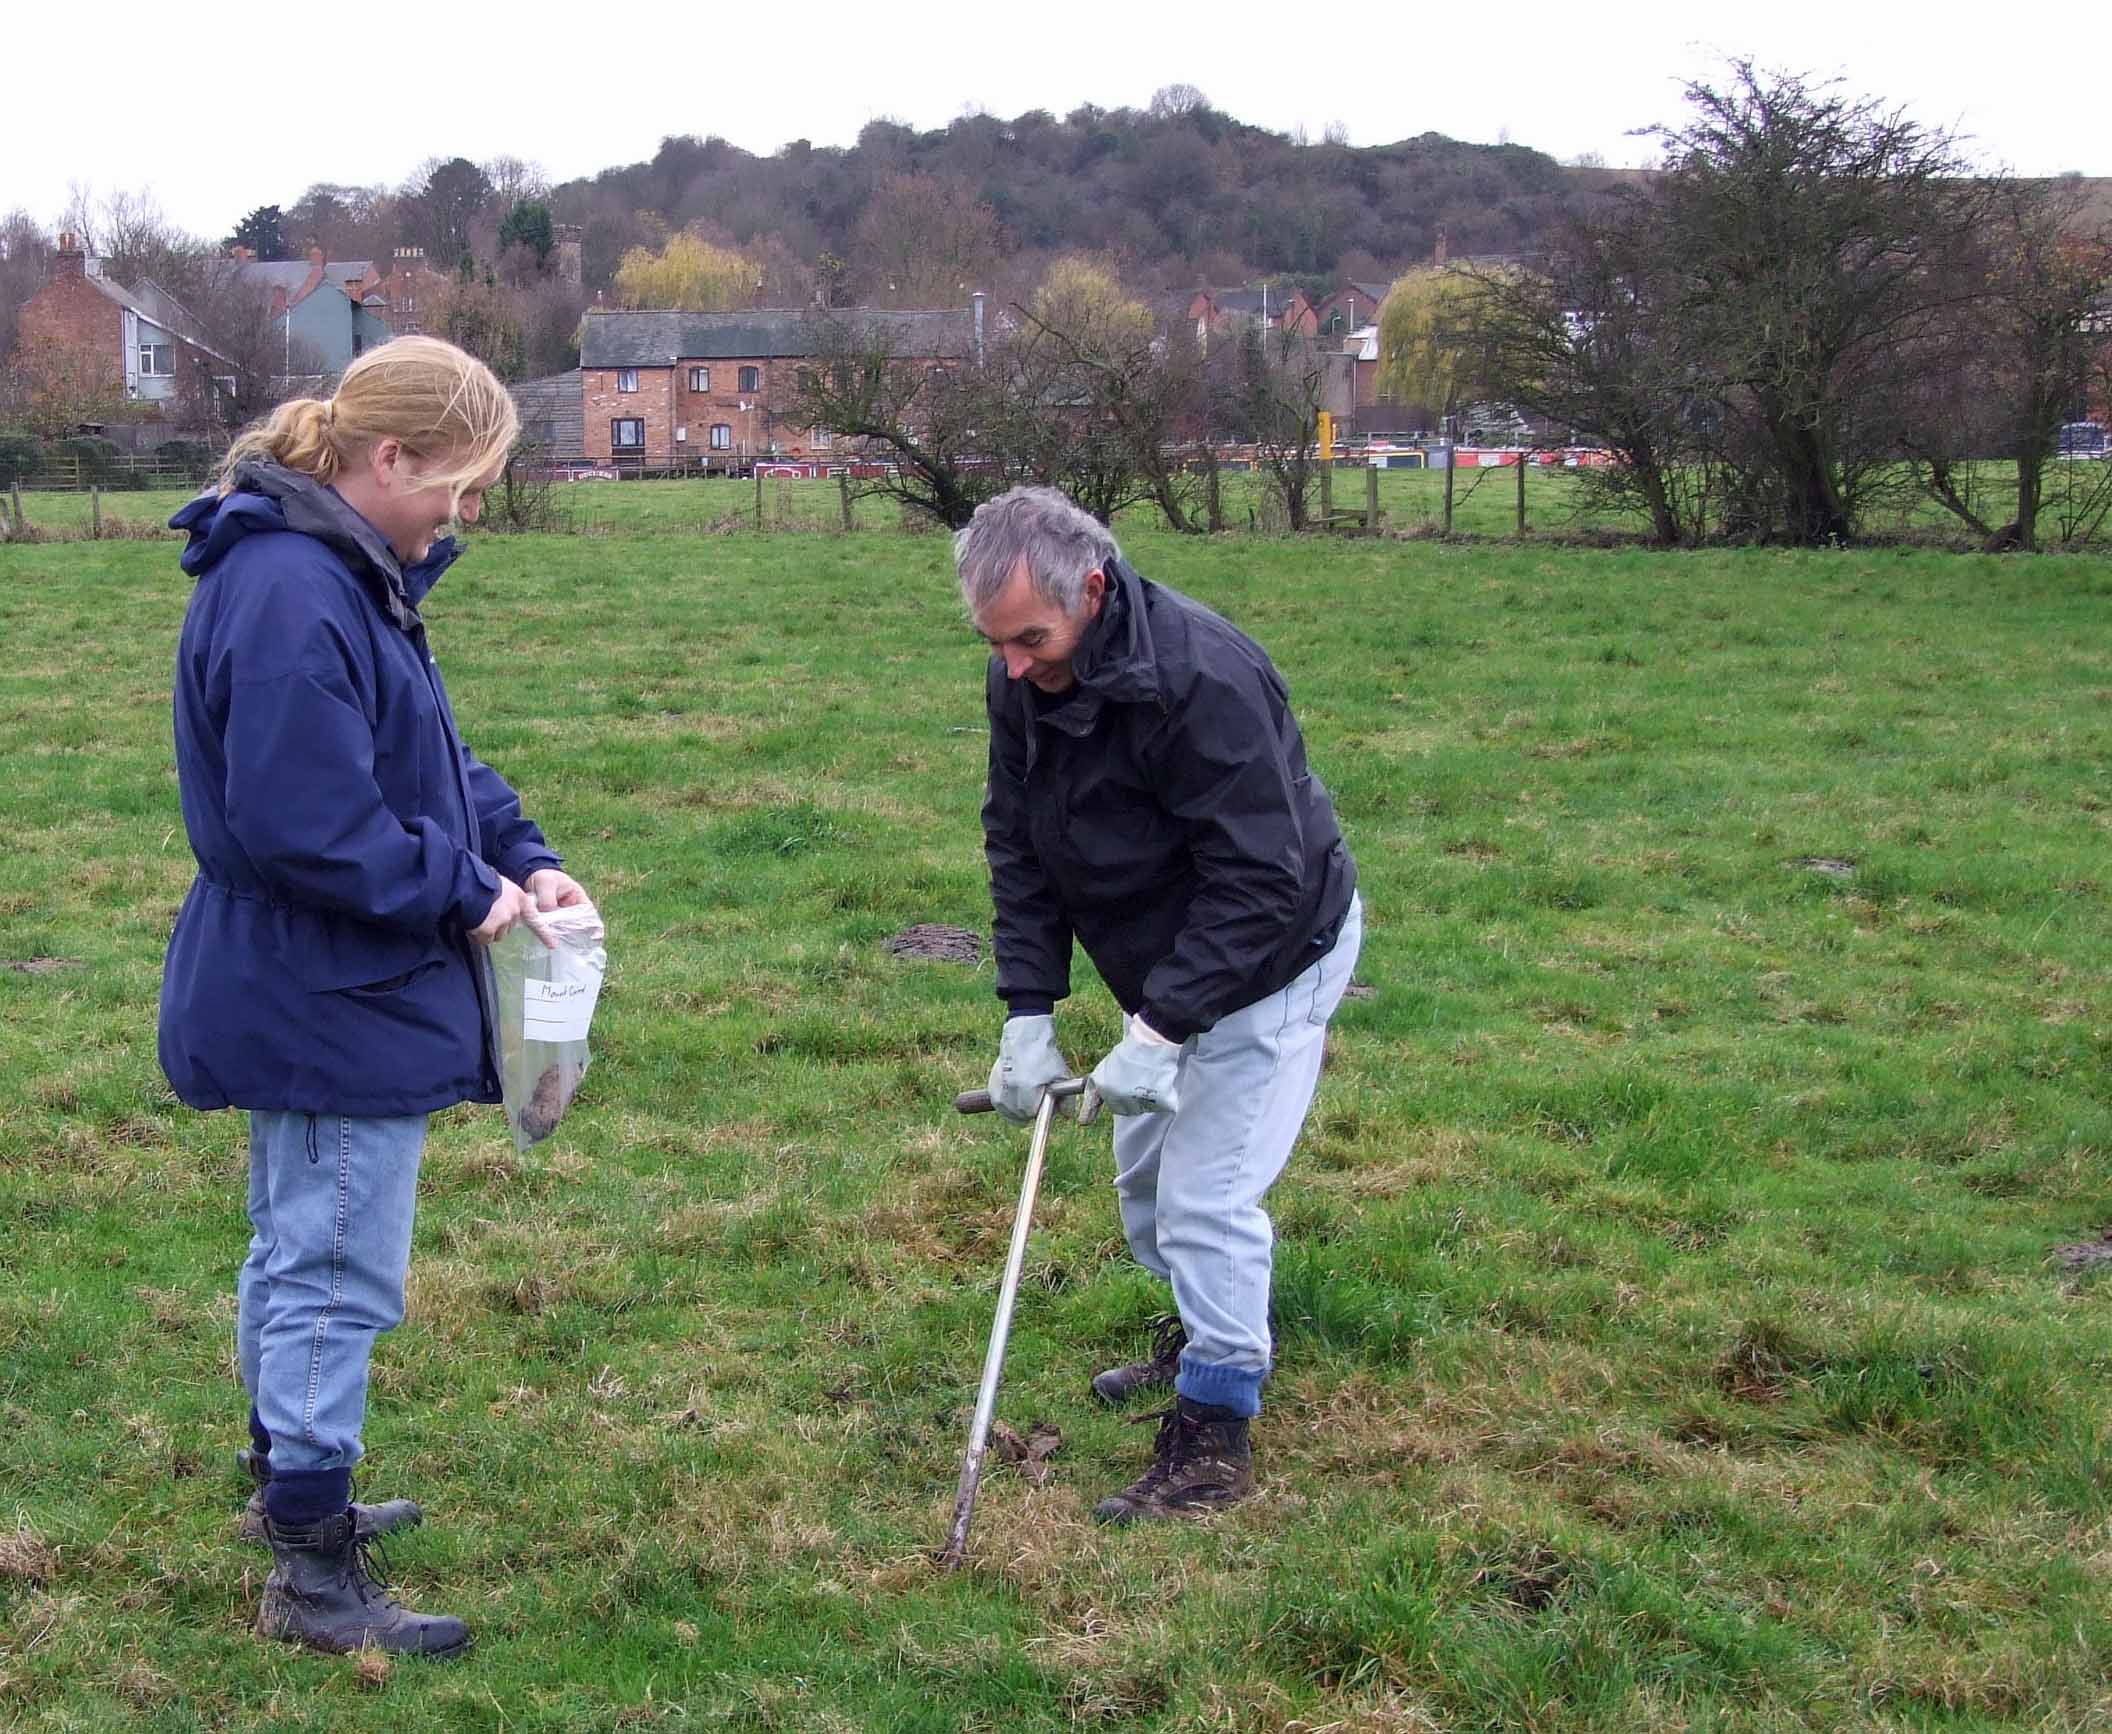 A photograph of two people working in a field. Hills, trees and buildings can be seen in the distance. One person uses a tool to collect a sample from the ground while another holds a bag open for the sample to be collected.